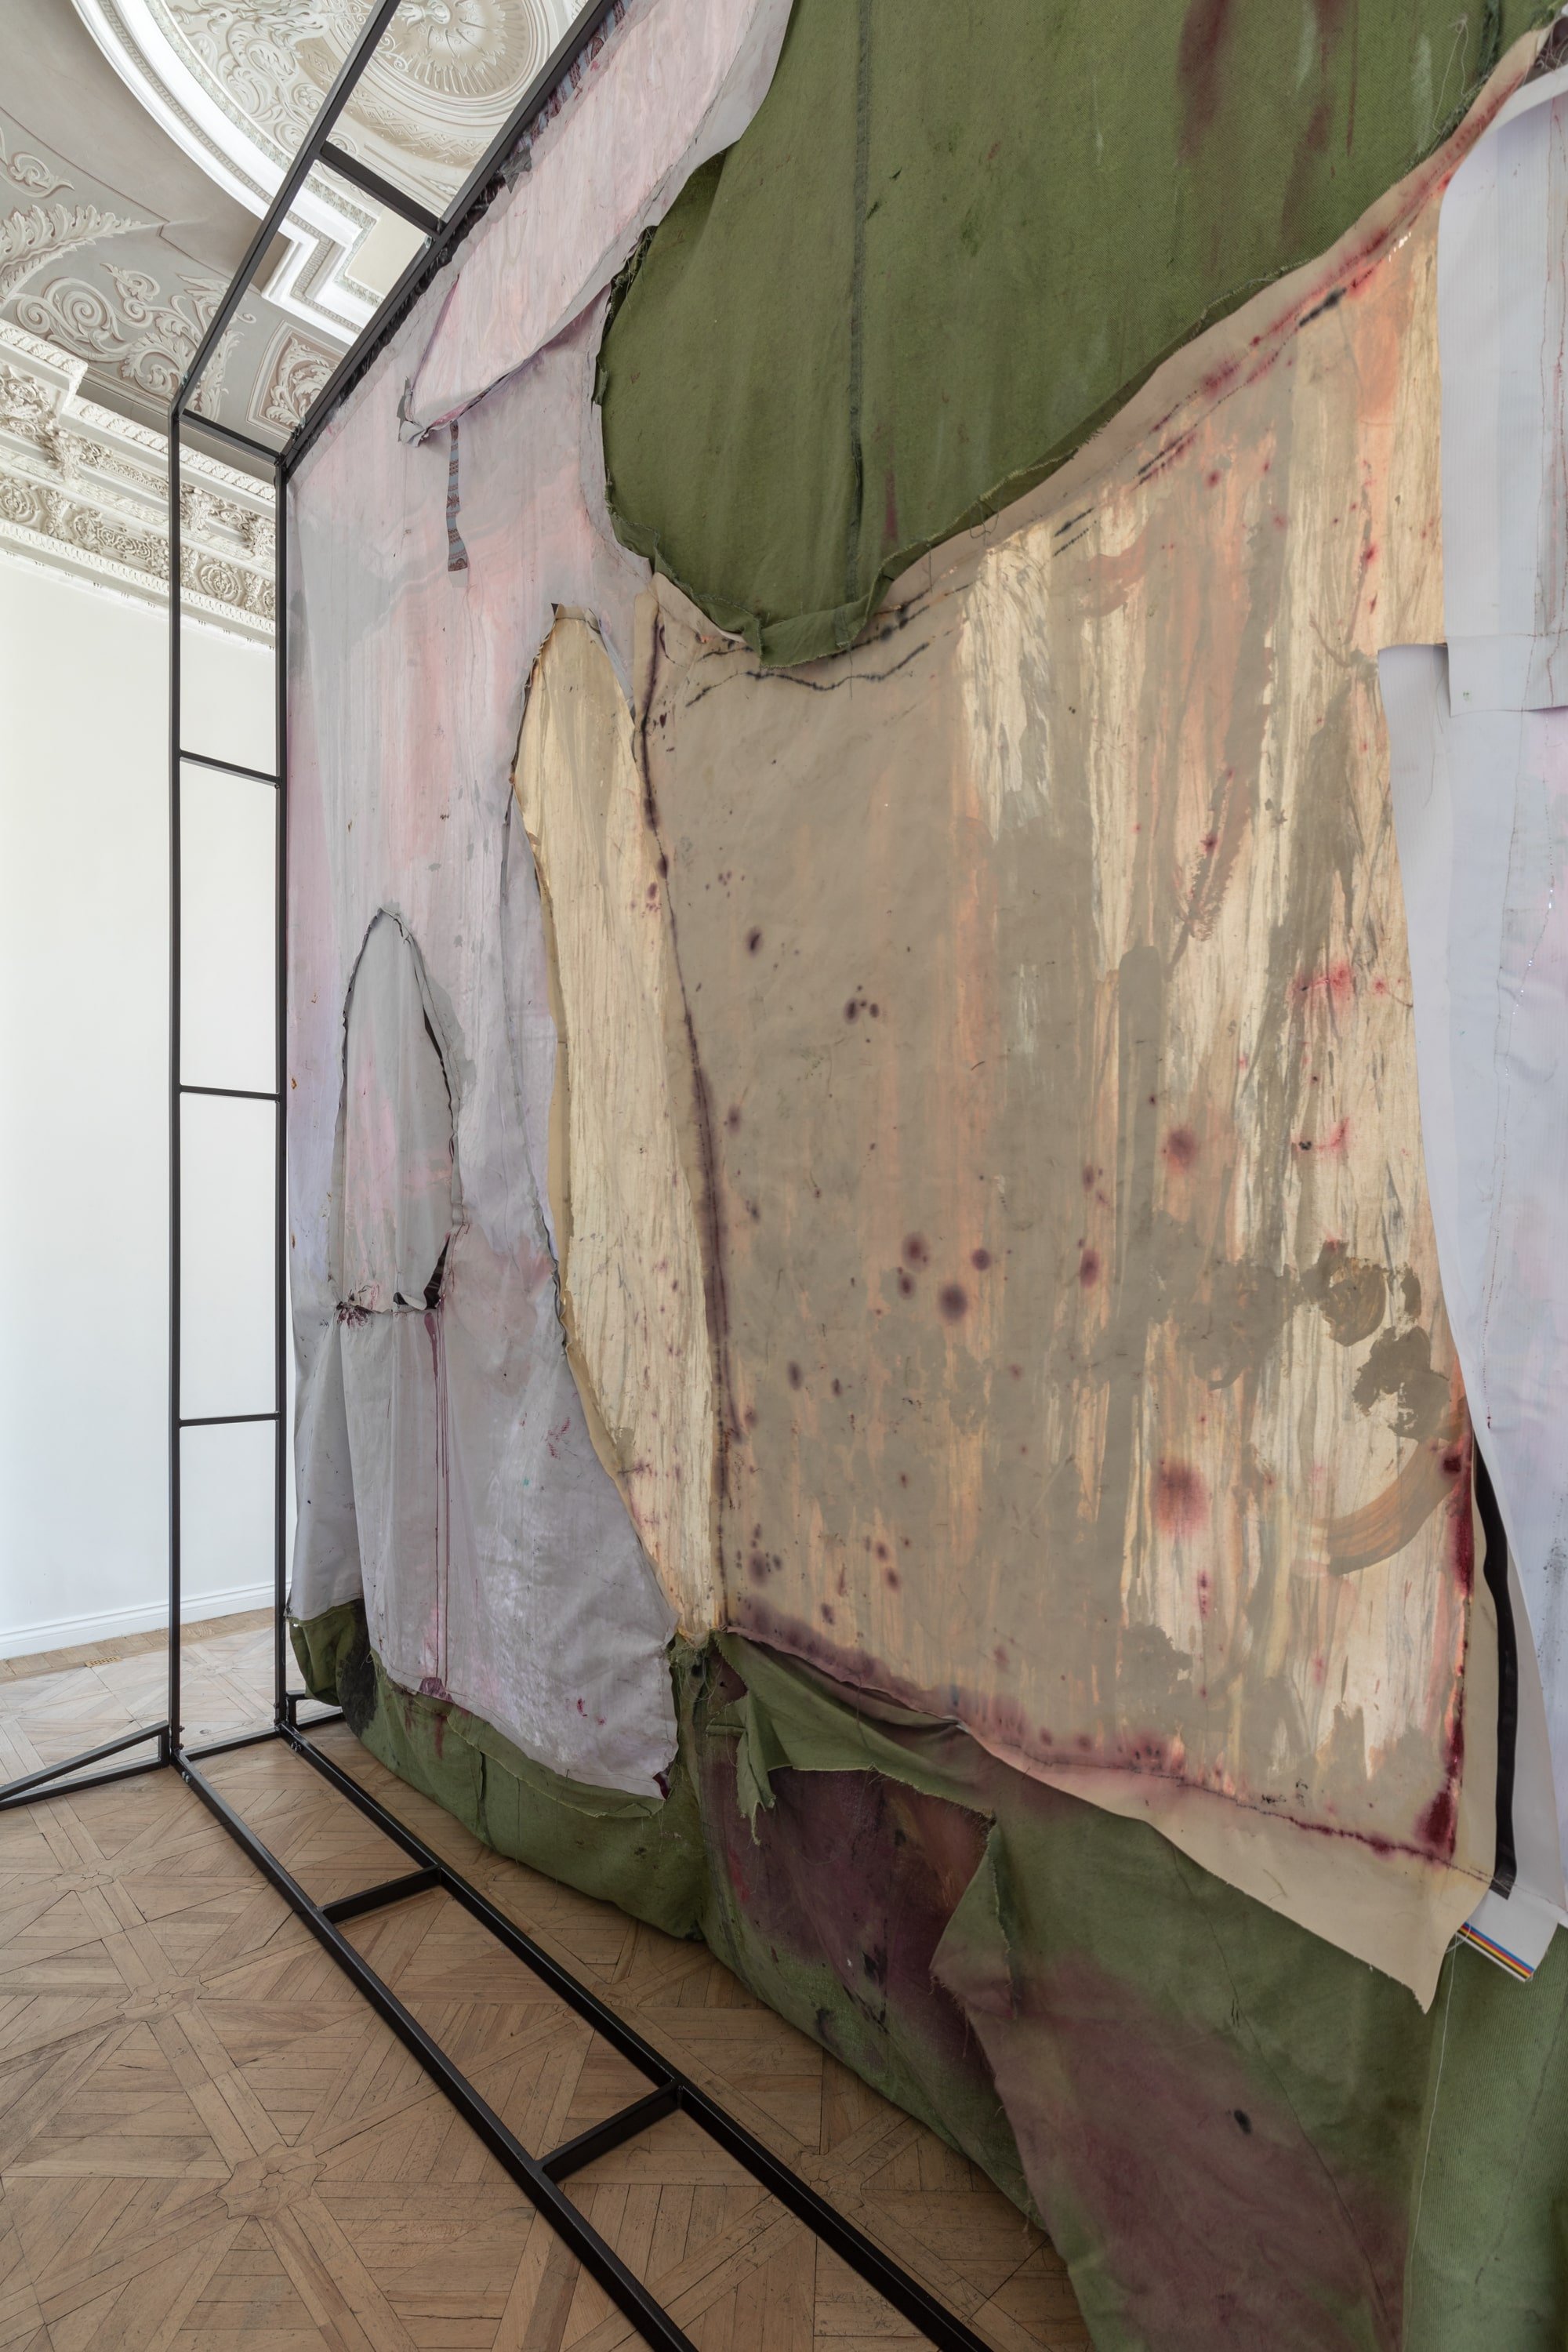 Ipatyev’s Room (back side), 2019. From the personal show Red Garden at the Szena gallery, Moscow